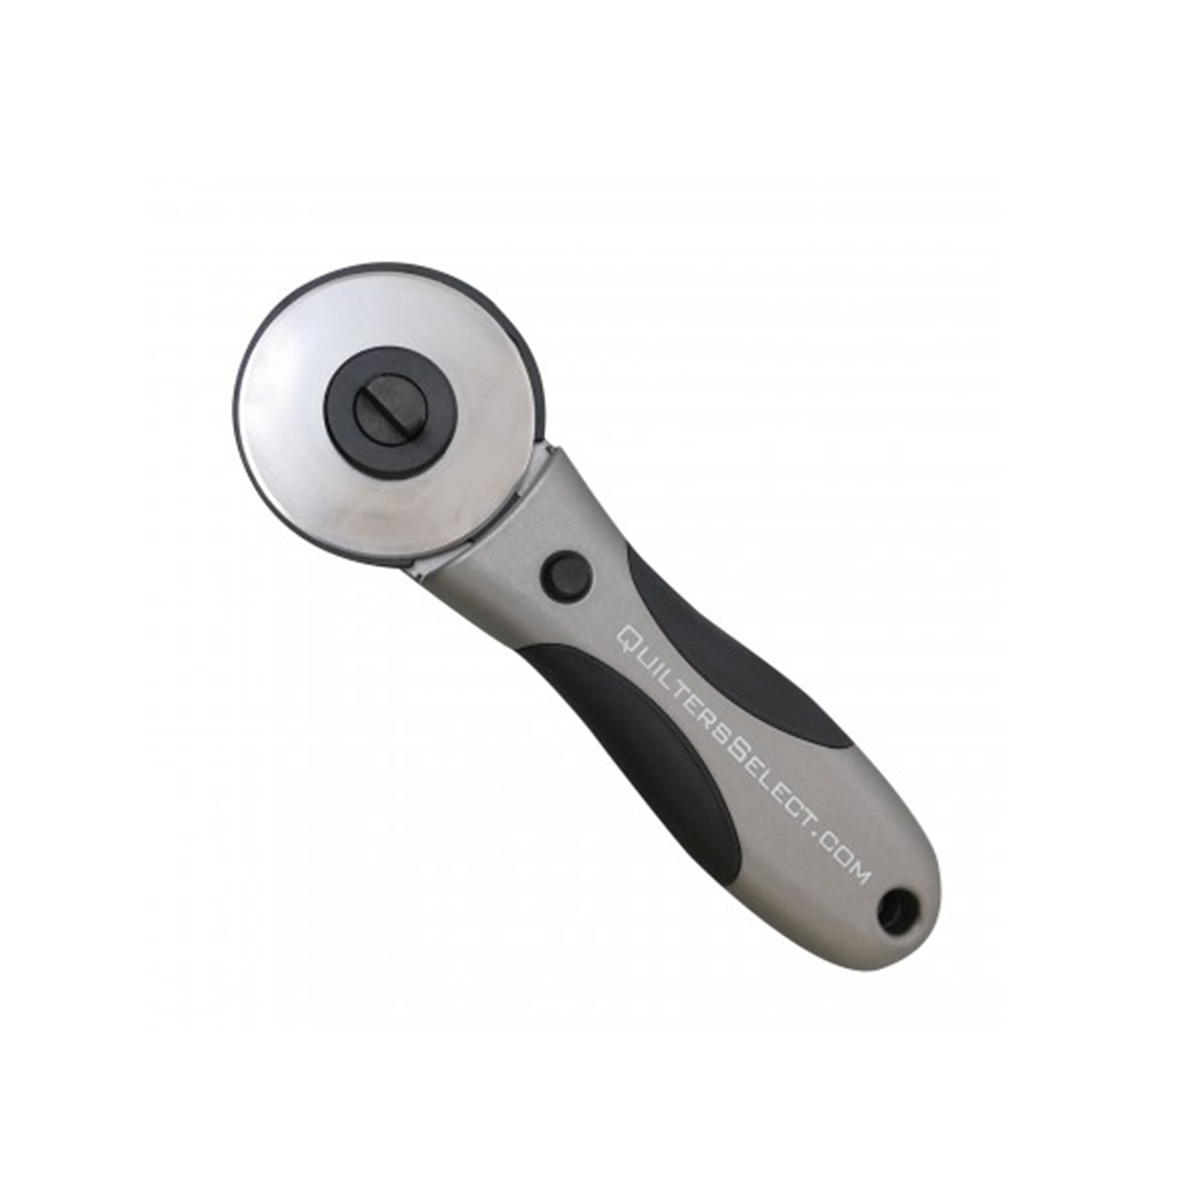 60mm Rotary Cutter with Soft-Touch Handle